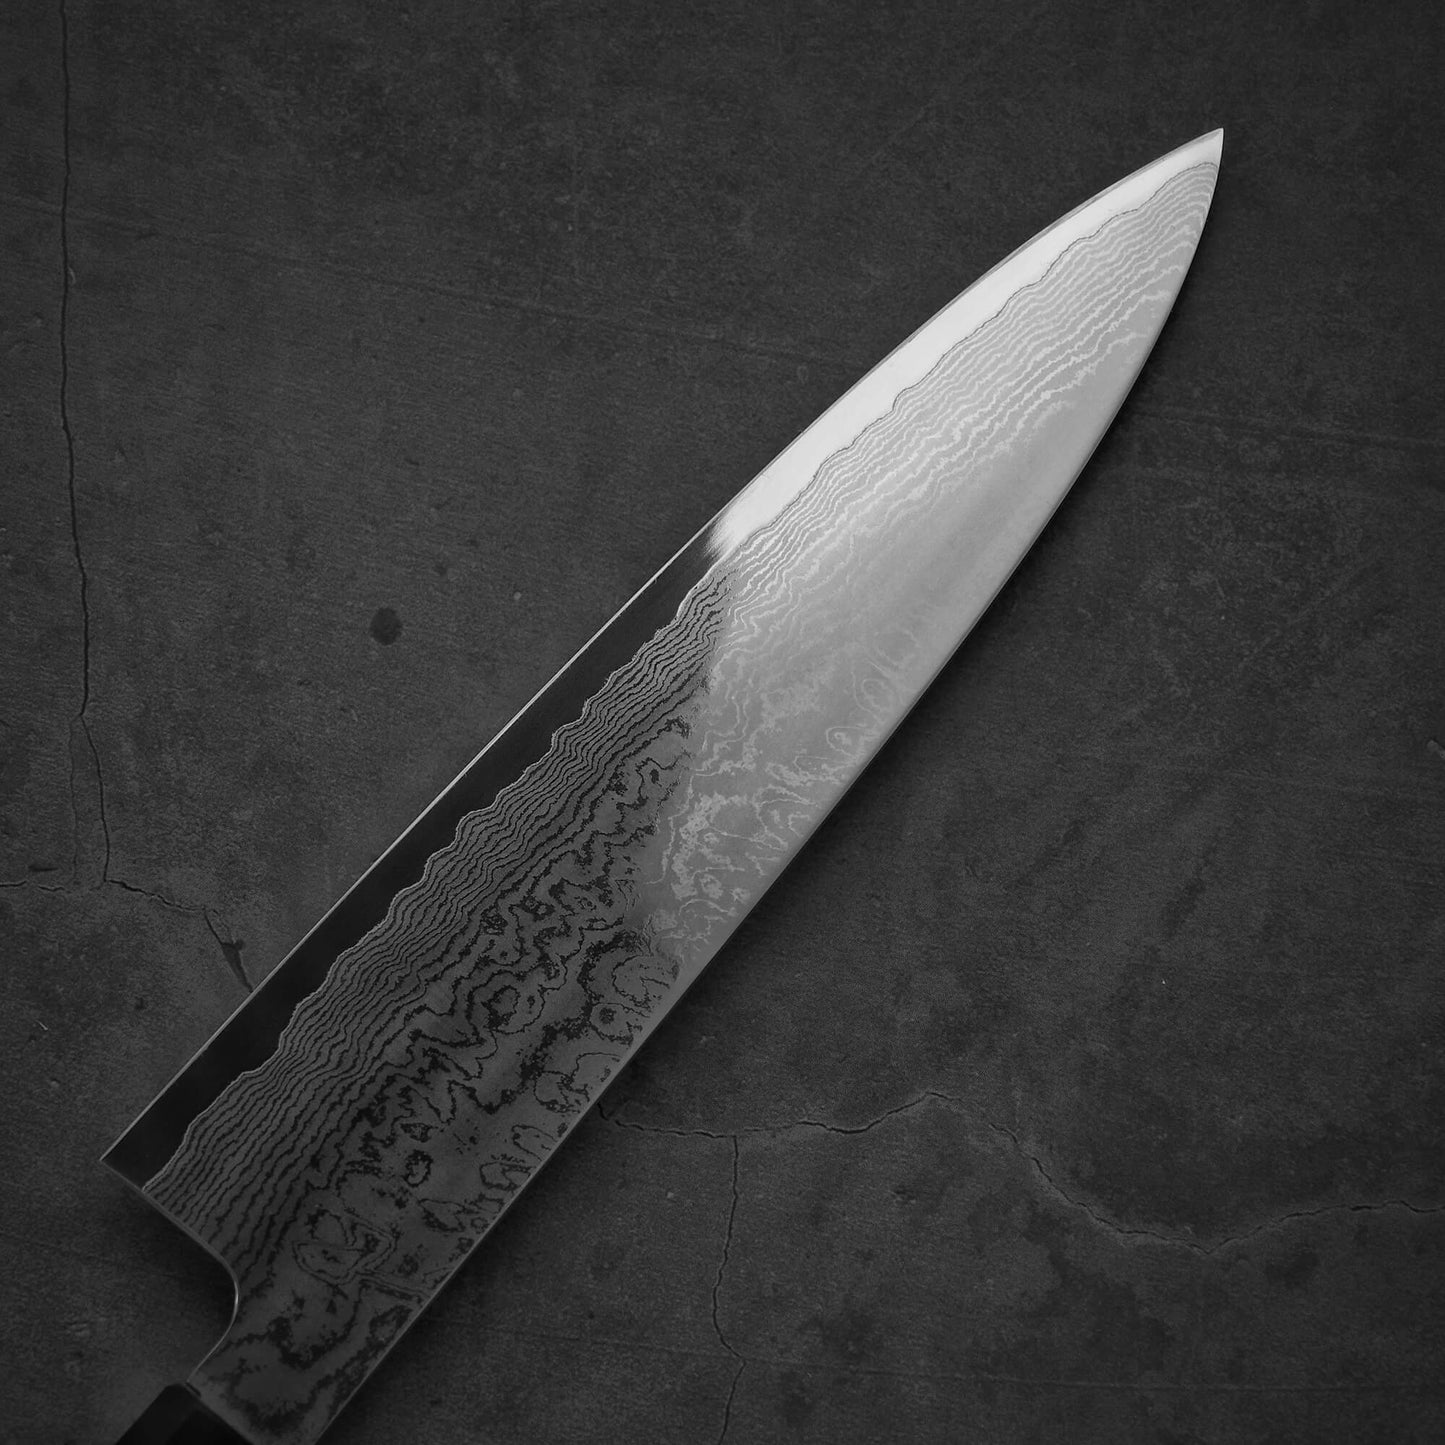 Top view of the left-blade side of Sukenari damascus XEOS gyuto 